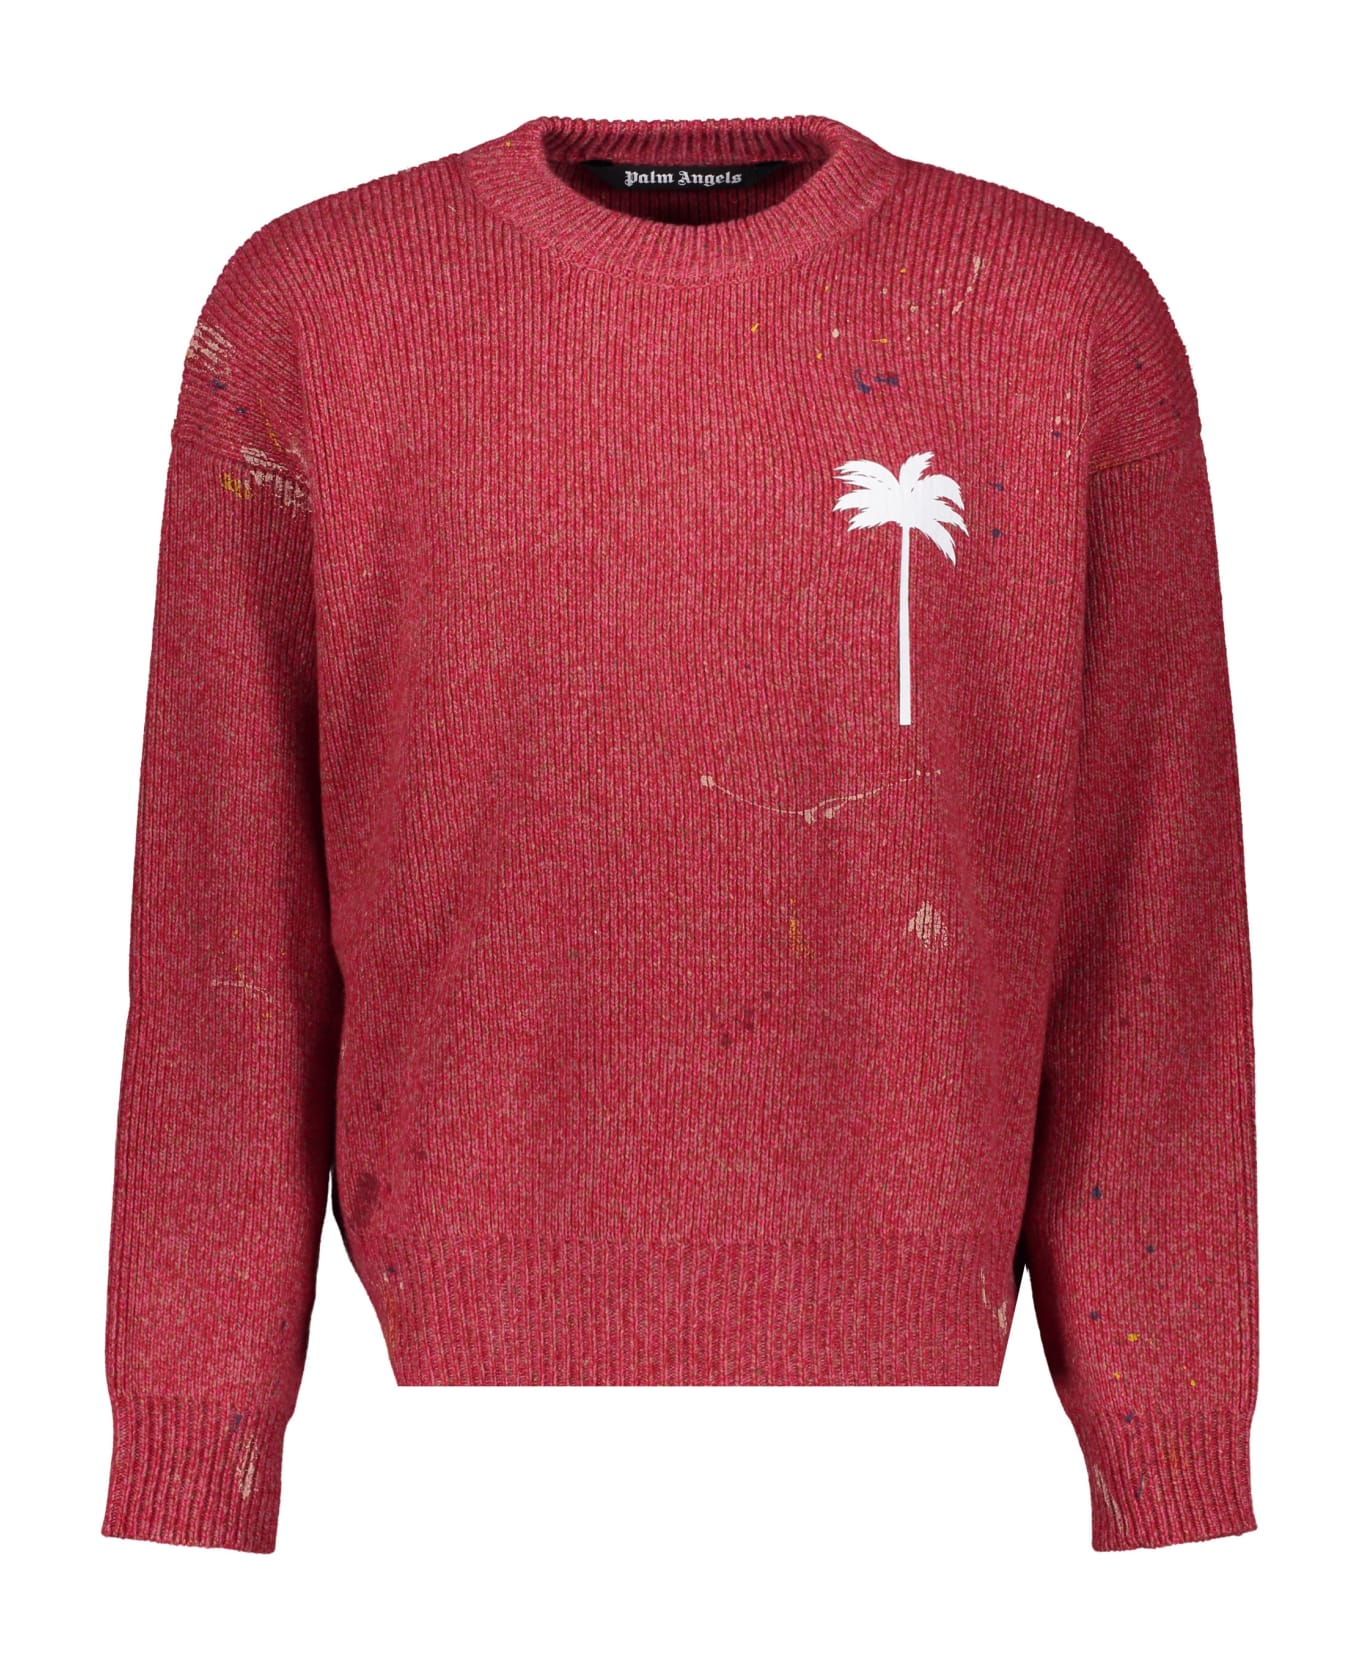 Palm Angels Long Sleeve Crew-neck Sweater - red